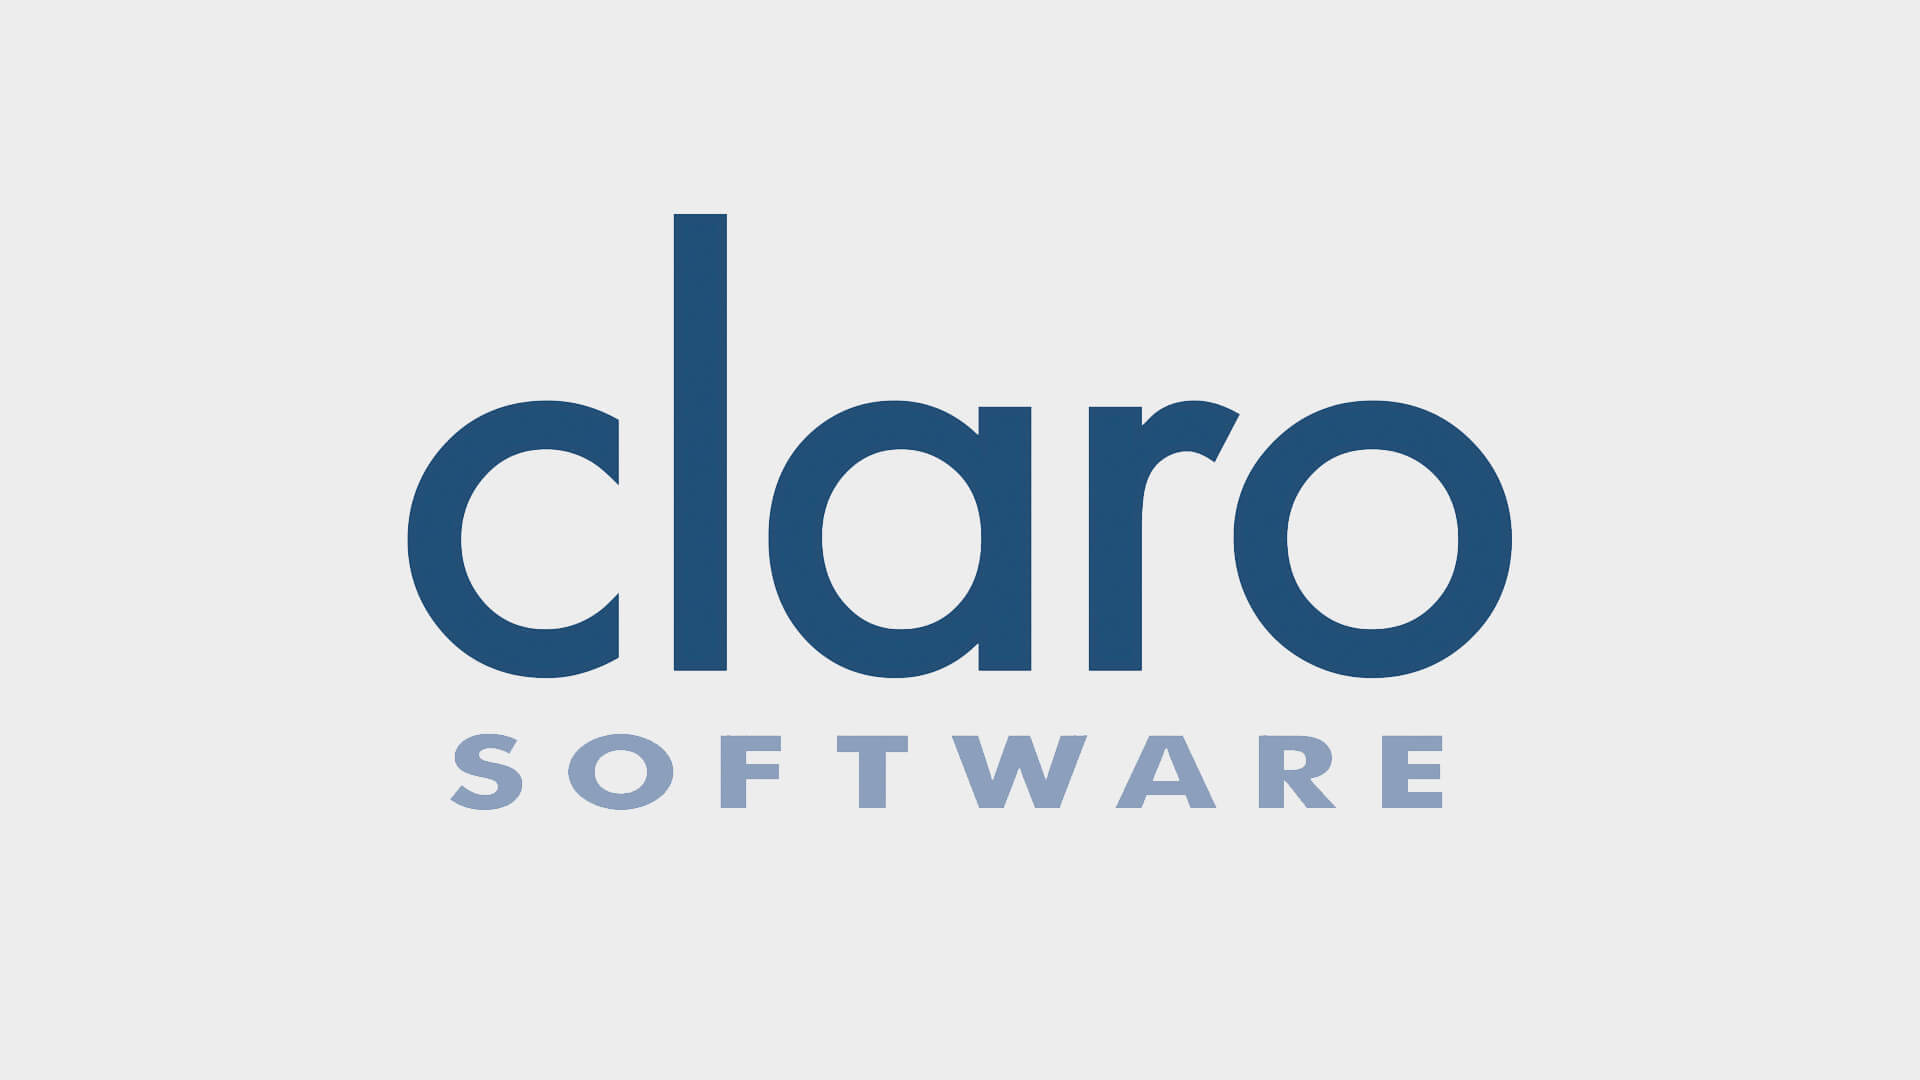 Click here to see all Claro software videos